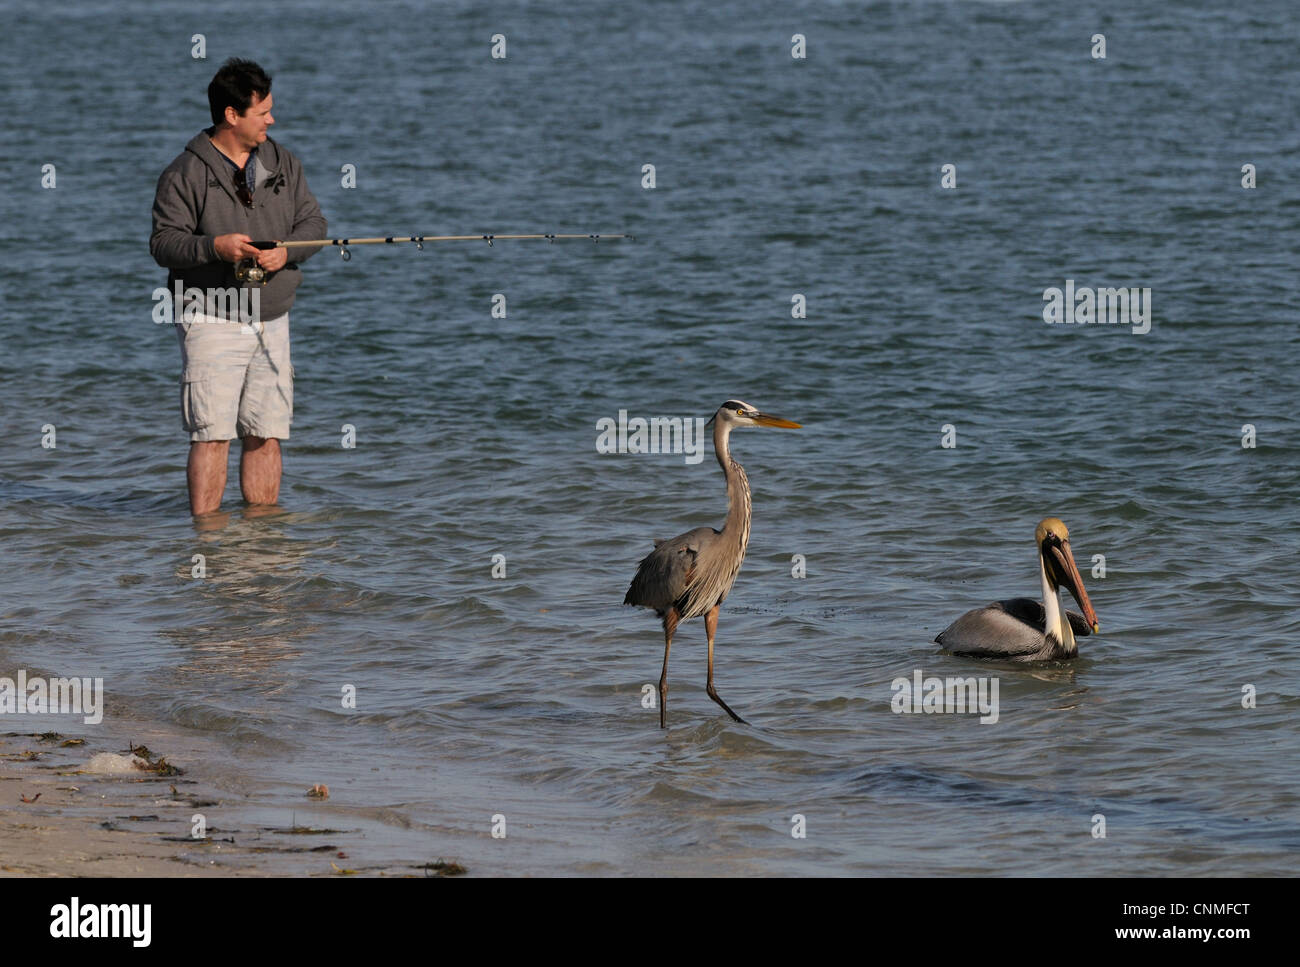 Fisherman to catch some fish standing in the waters of the Gulf of Mexico. Two birds, a Brown Pelican and a Great Blue Heron. Stock Photo